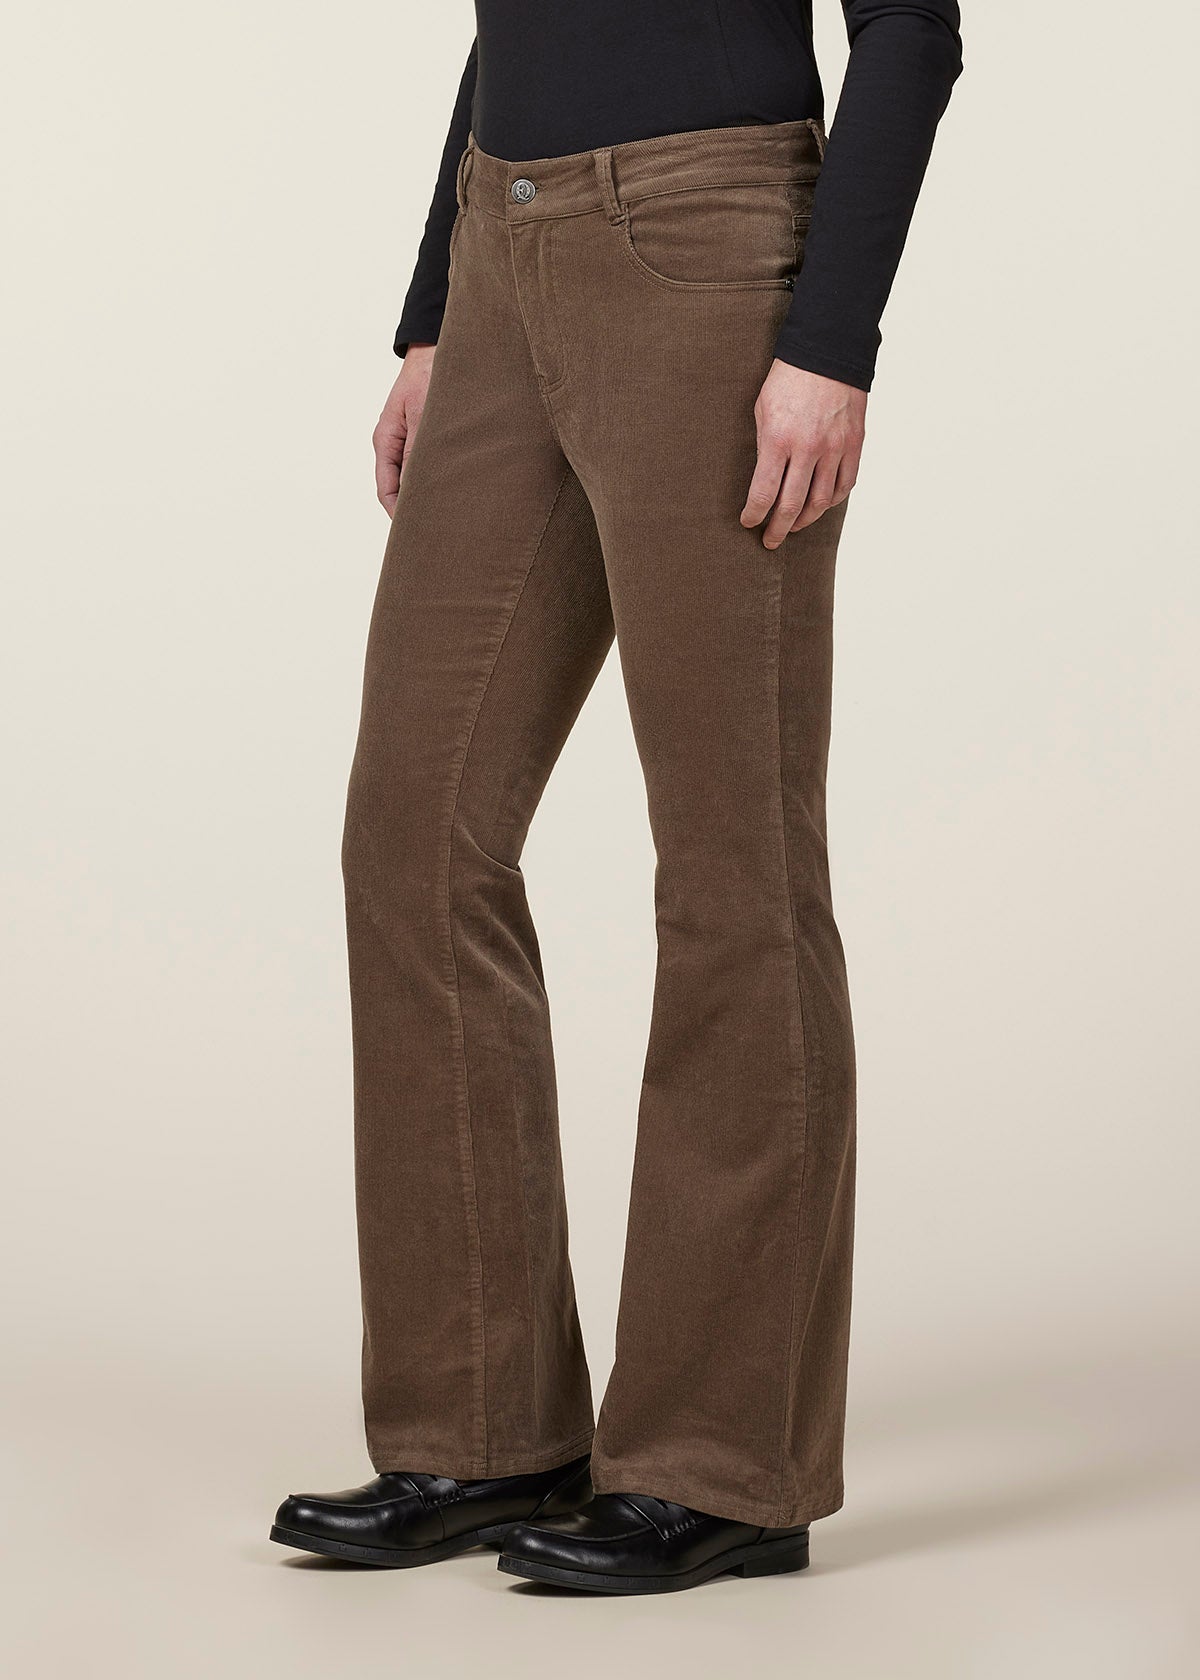 Soft-brushed, full-length bohemian flare pants featuring a high